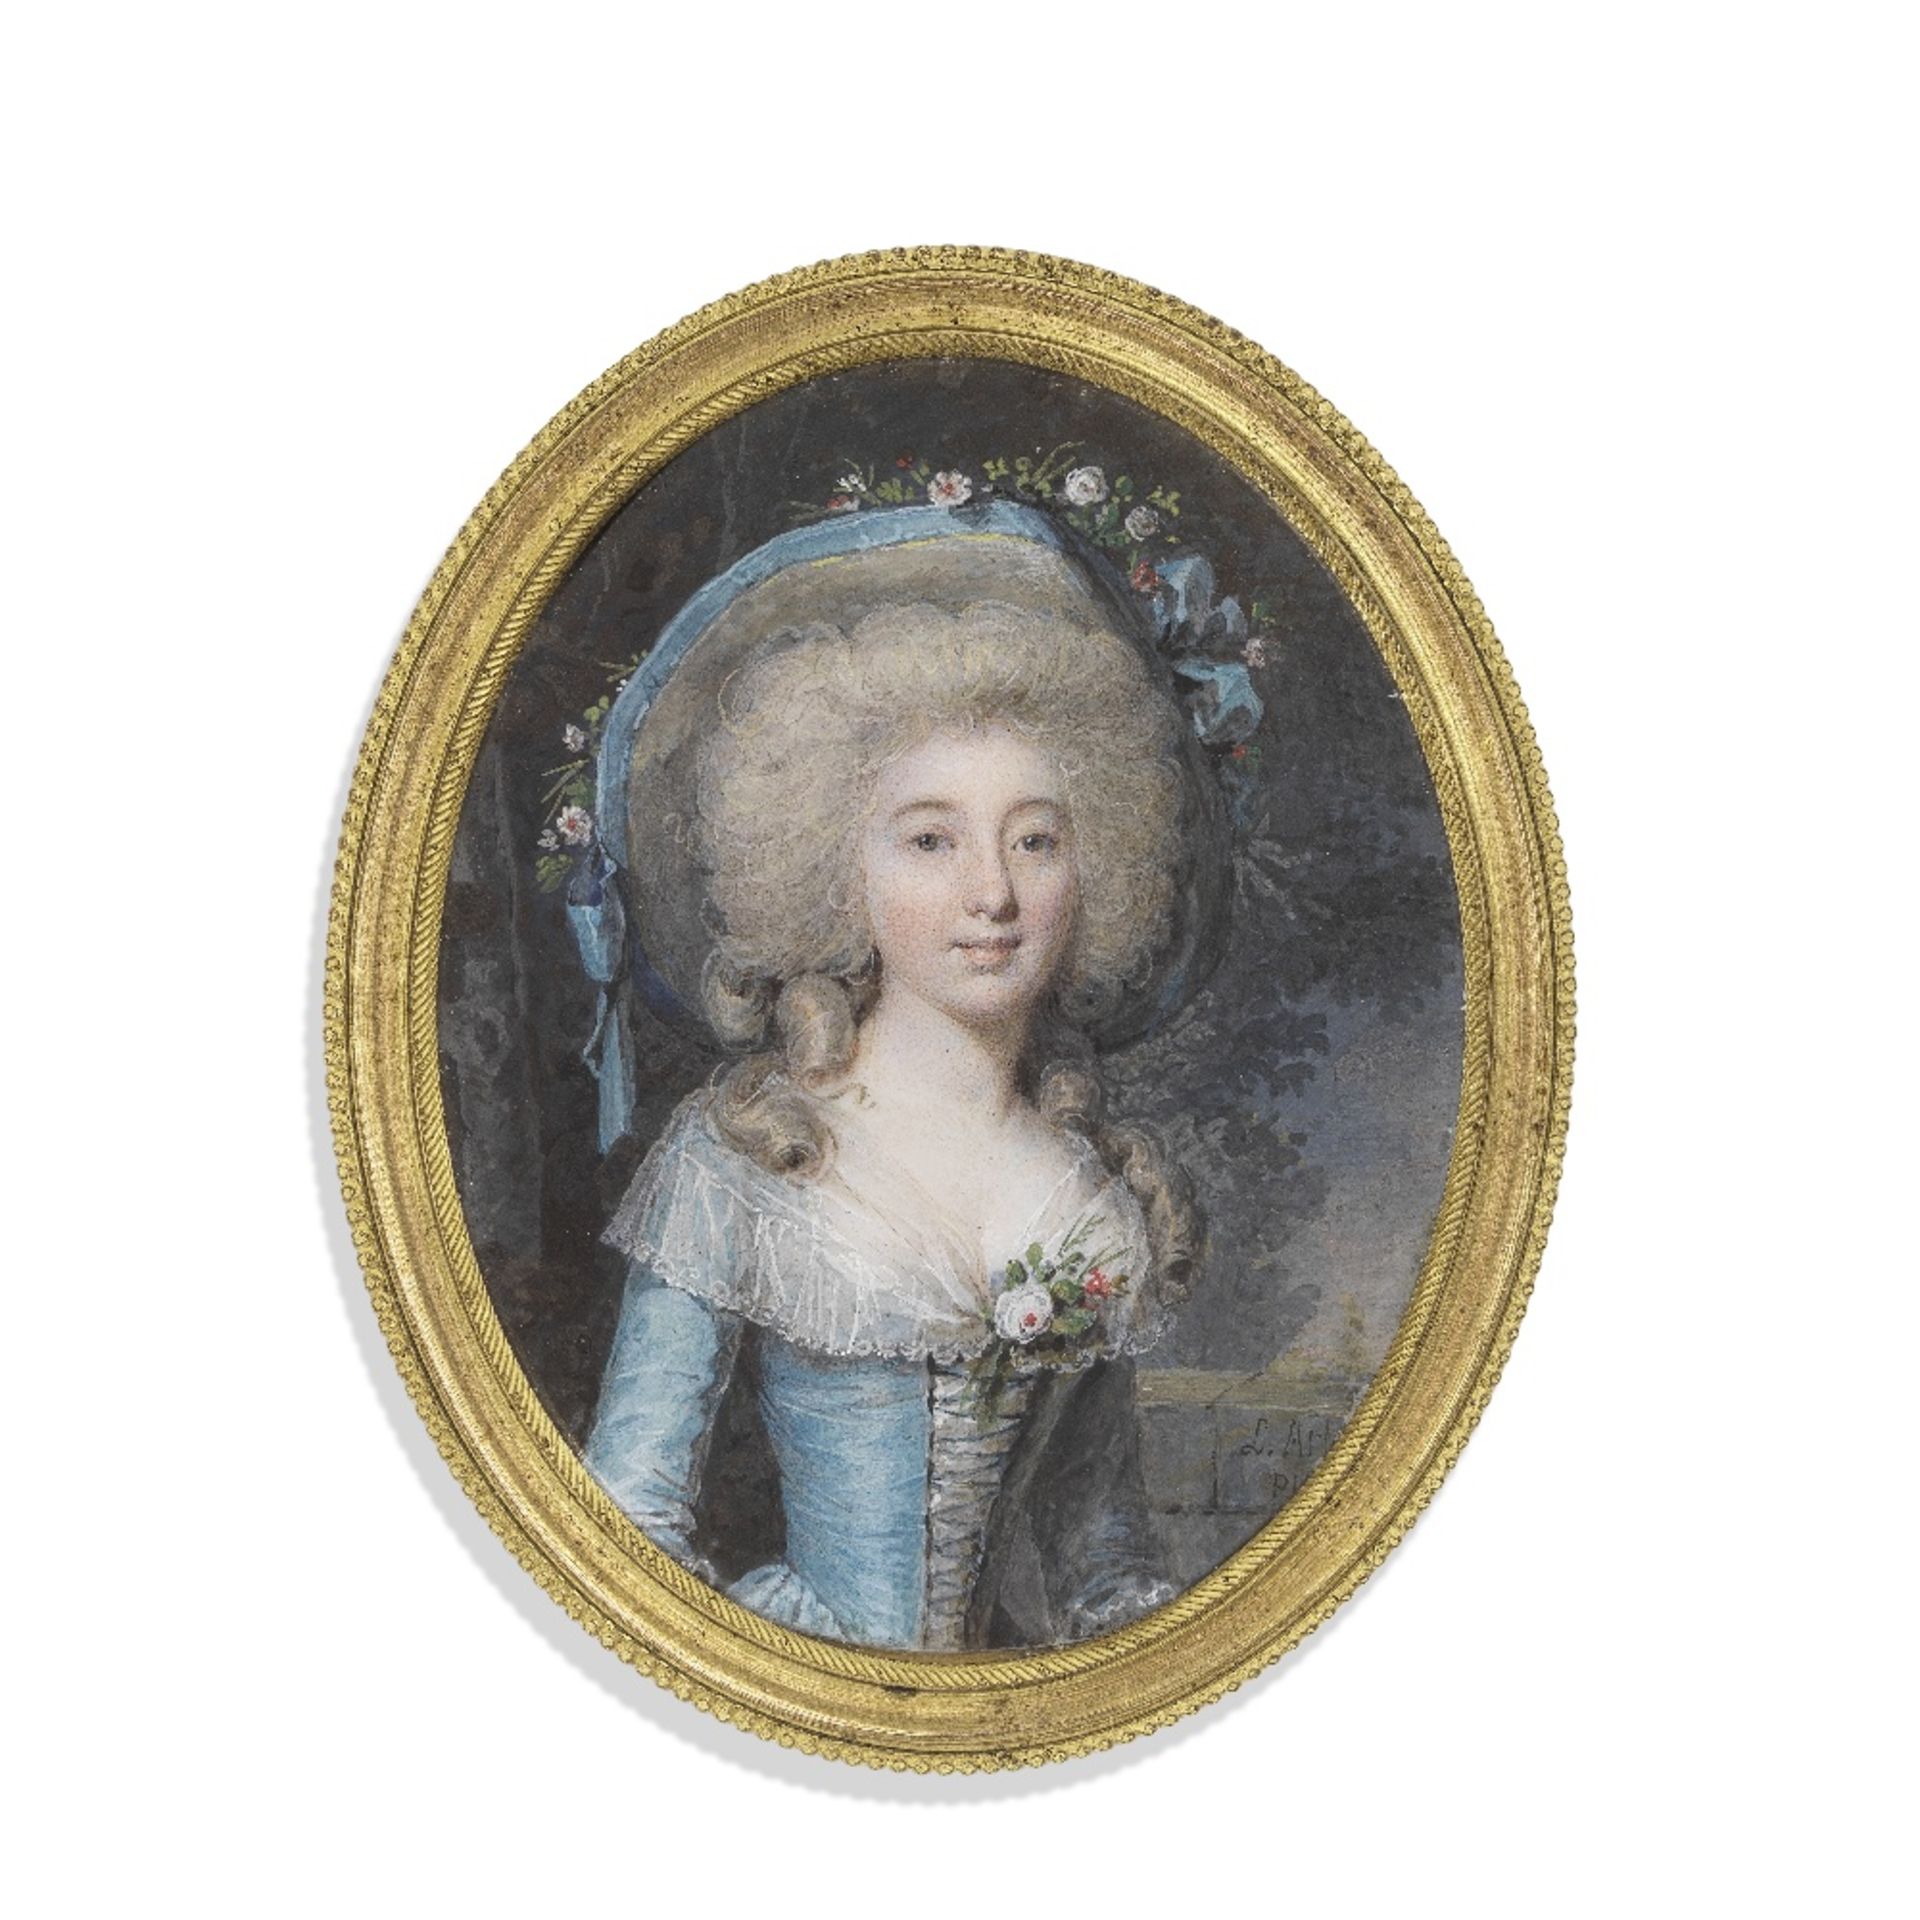 LOUIS AMI ARLAUD-JURINE (SWISS, 1751-1829): PORTRAIT MINIATURE OF A LADY IN WAITING TO QUEEN MAR...